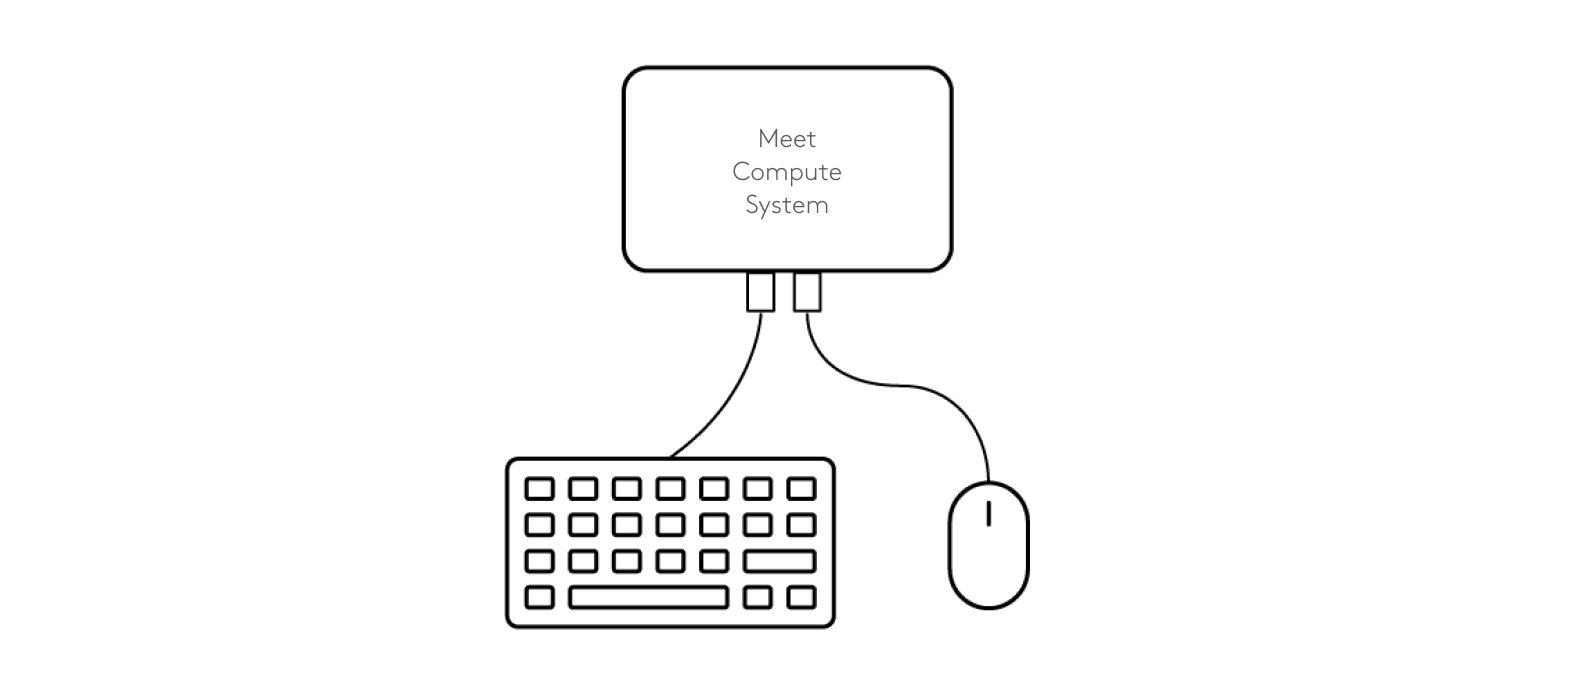 Diagram of connecting keyboard and mouse to Meet Compute System